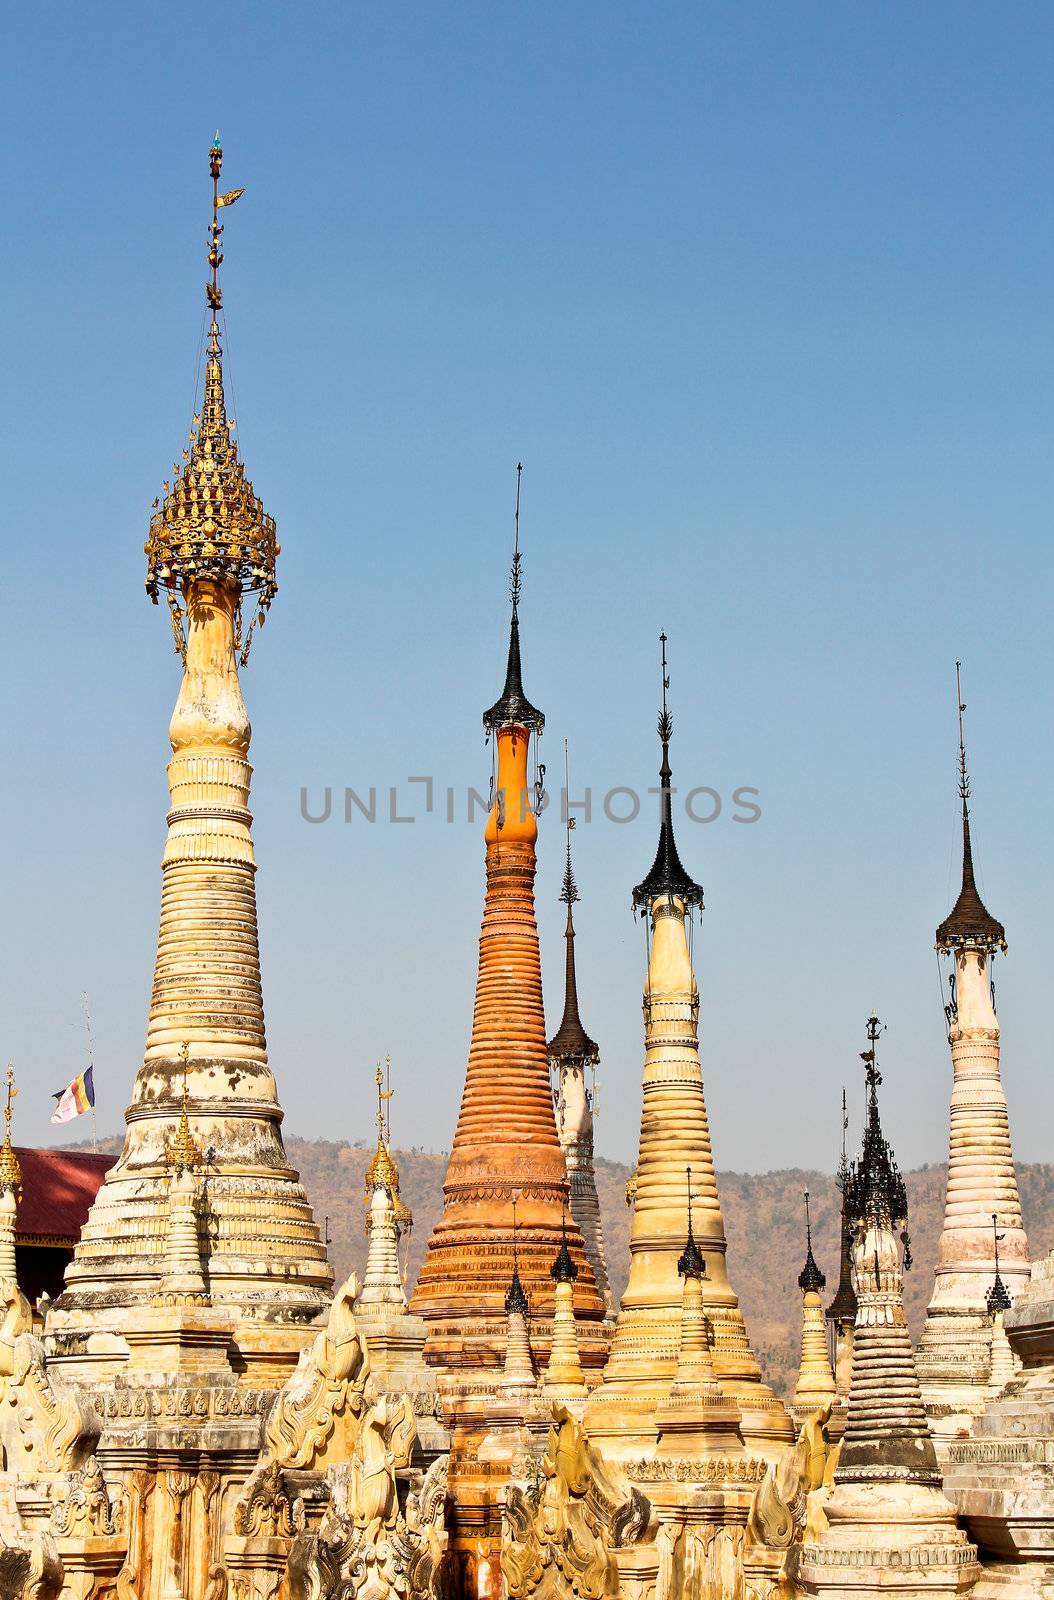 Pagoda in a Temple in Inle lake,Burma by vanillaechoes